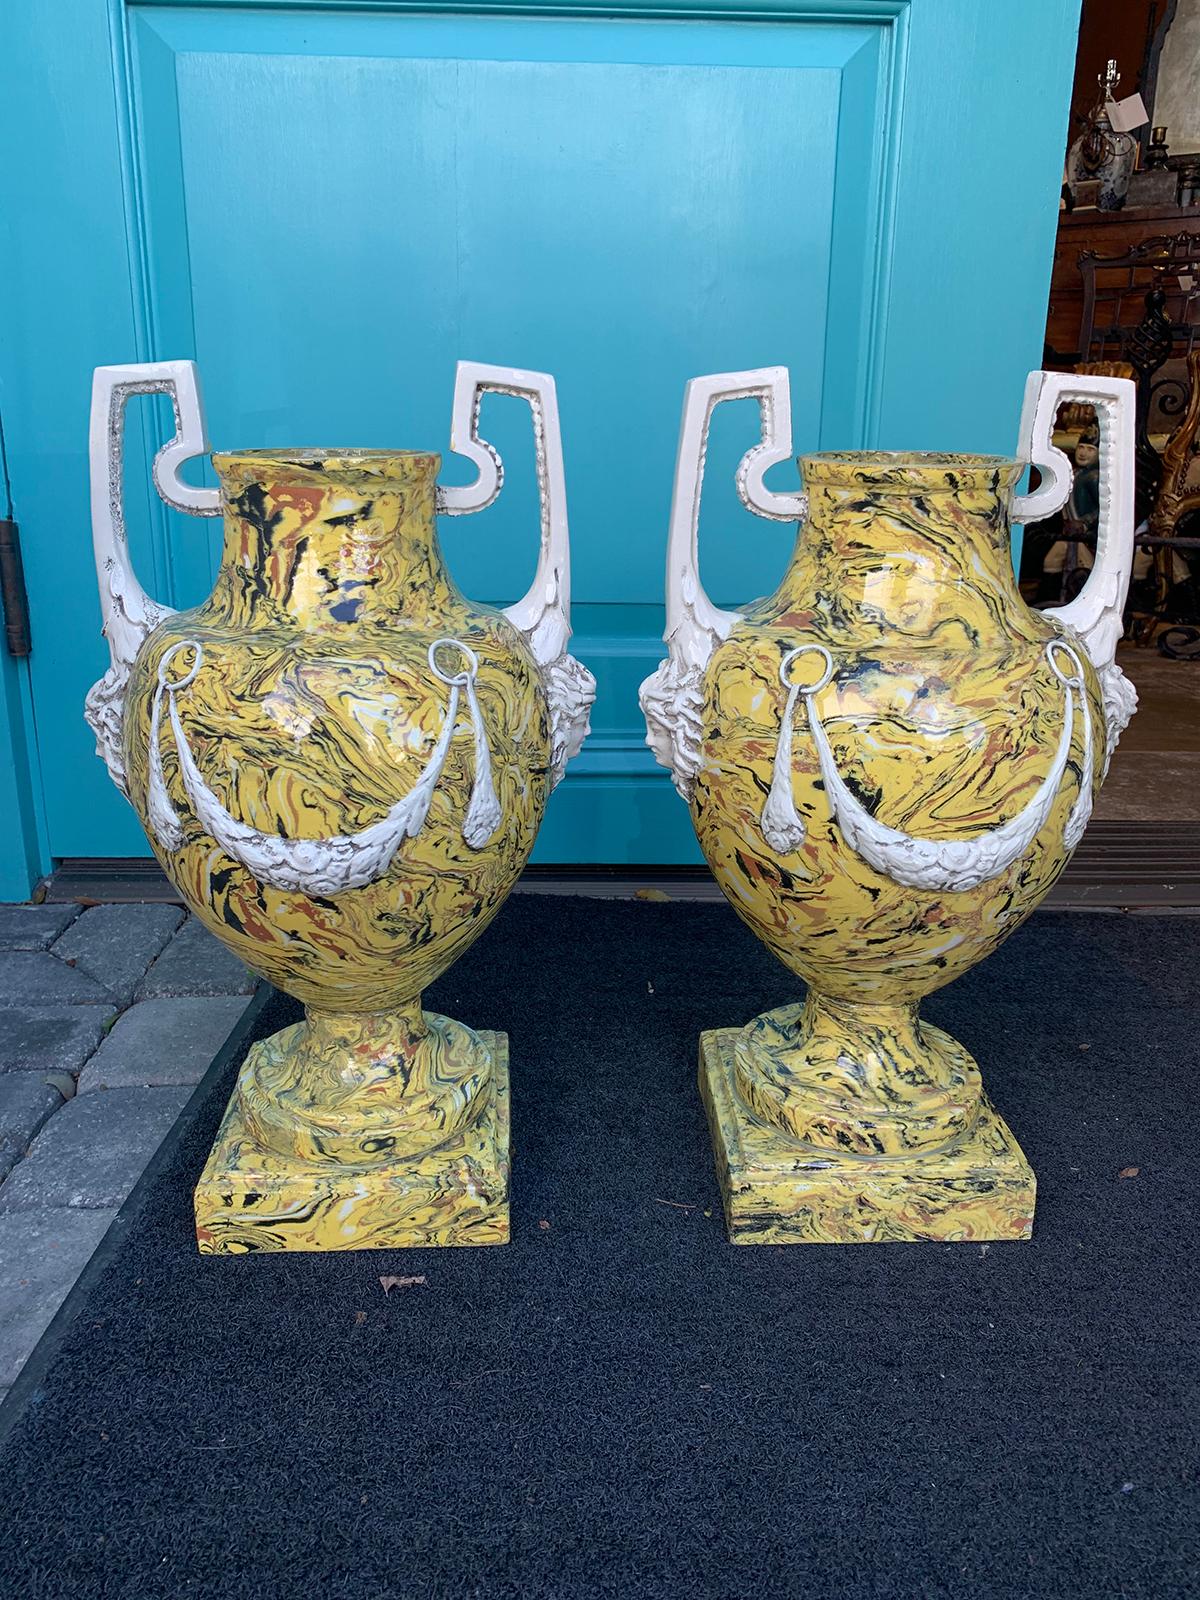 Pair of mid-20th century Italian yellow agateware neoclassical urns by Meiselman, circa 1960s.